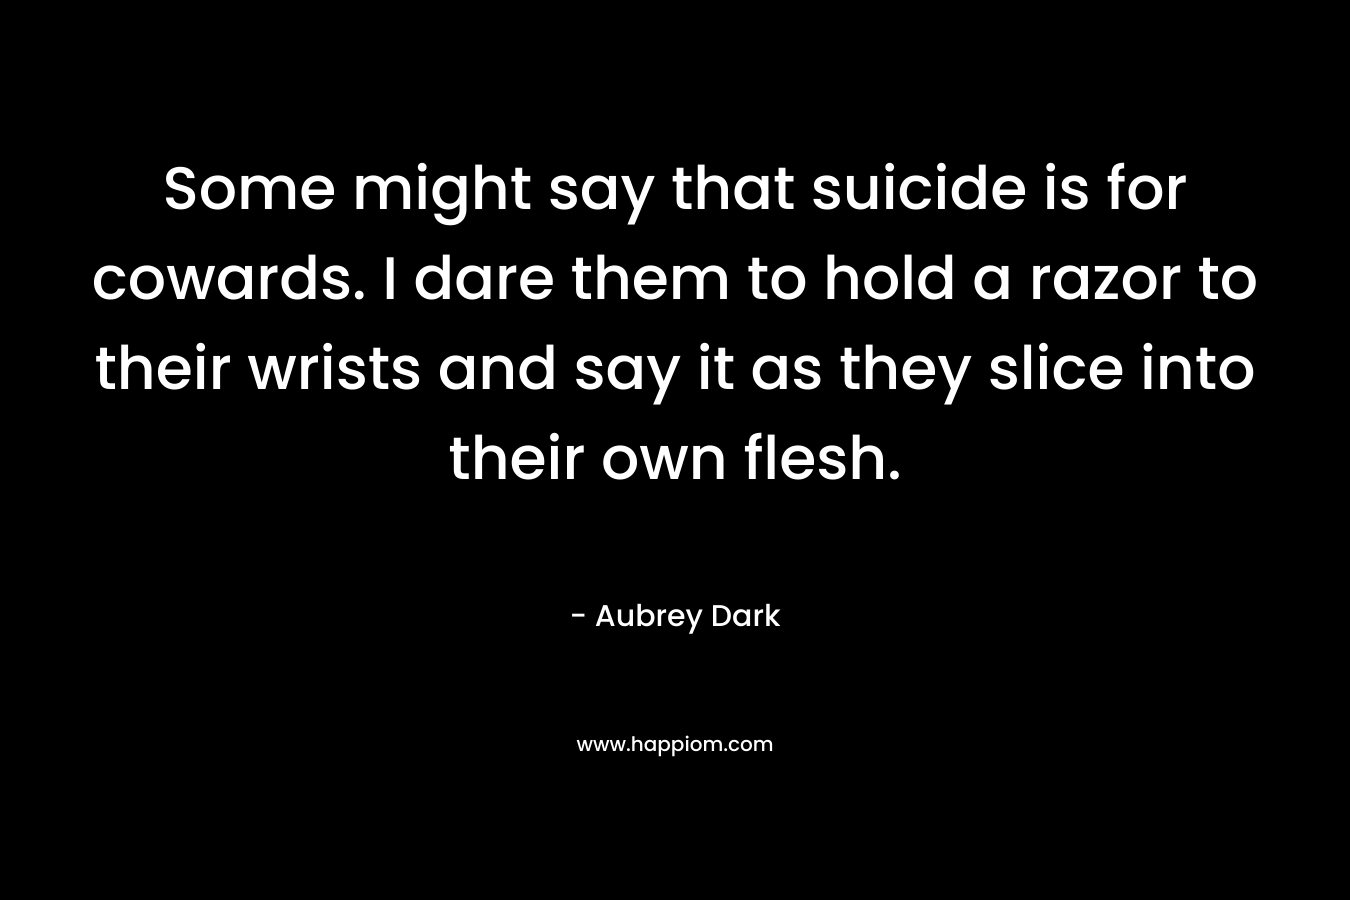 Some might say that suicide is for cowards. I dare them to hold a razor to their wrists and say it as they slice into their own flesh. – Aubrey Dark